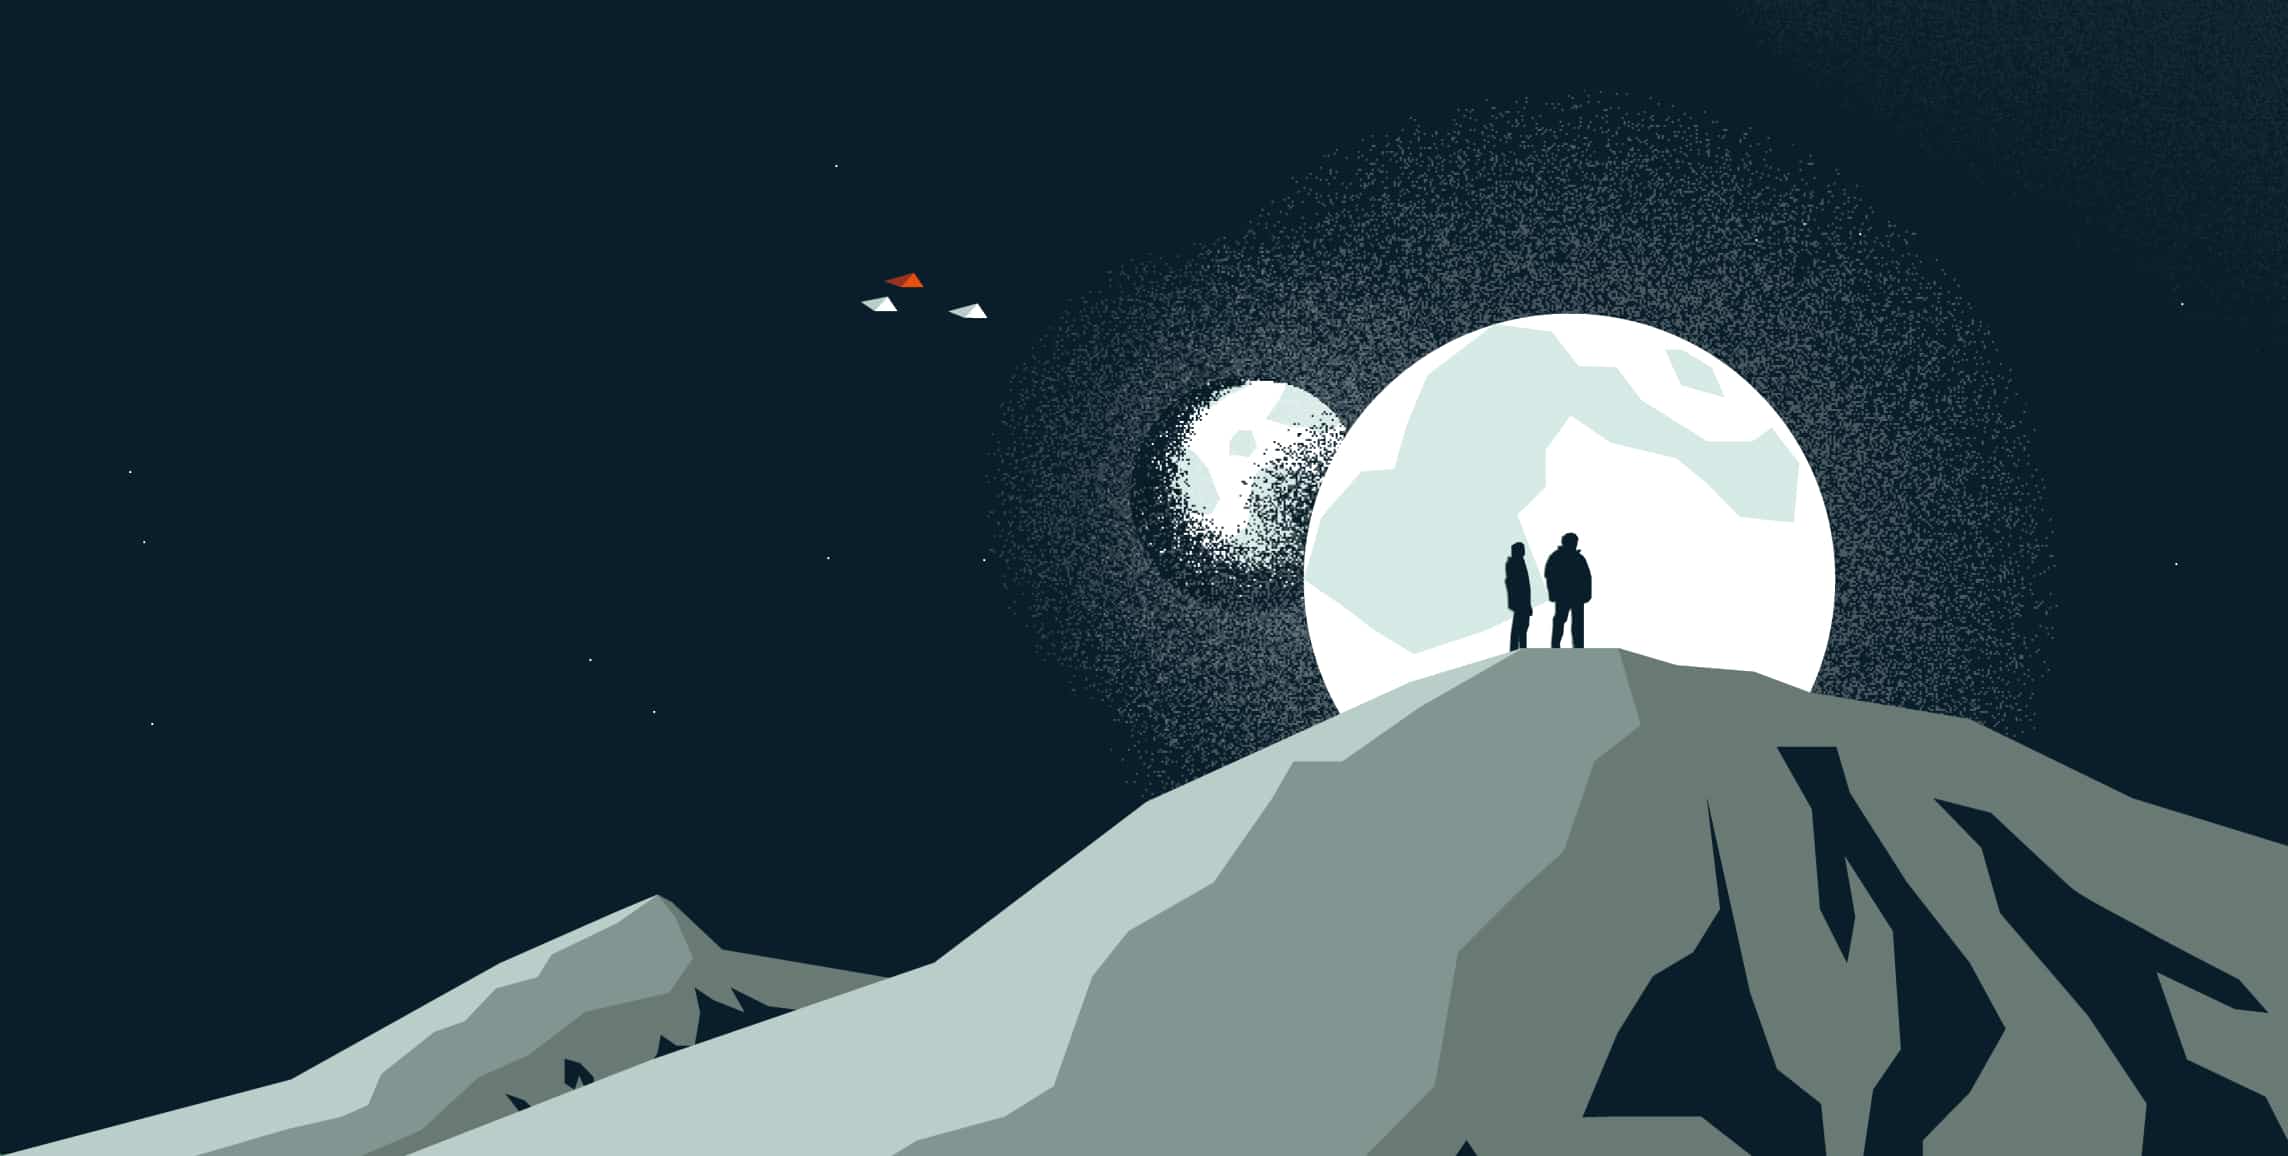 A sønr brand illustration, showing two people on top of a mountain on a strange planet, staring up at two moons as spaceships streak across the sky. Bit mad, for the insurance industry.